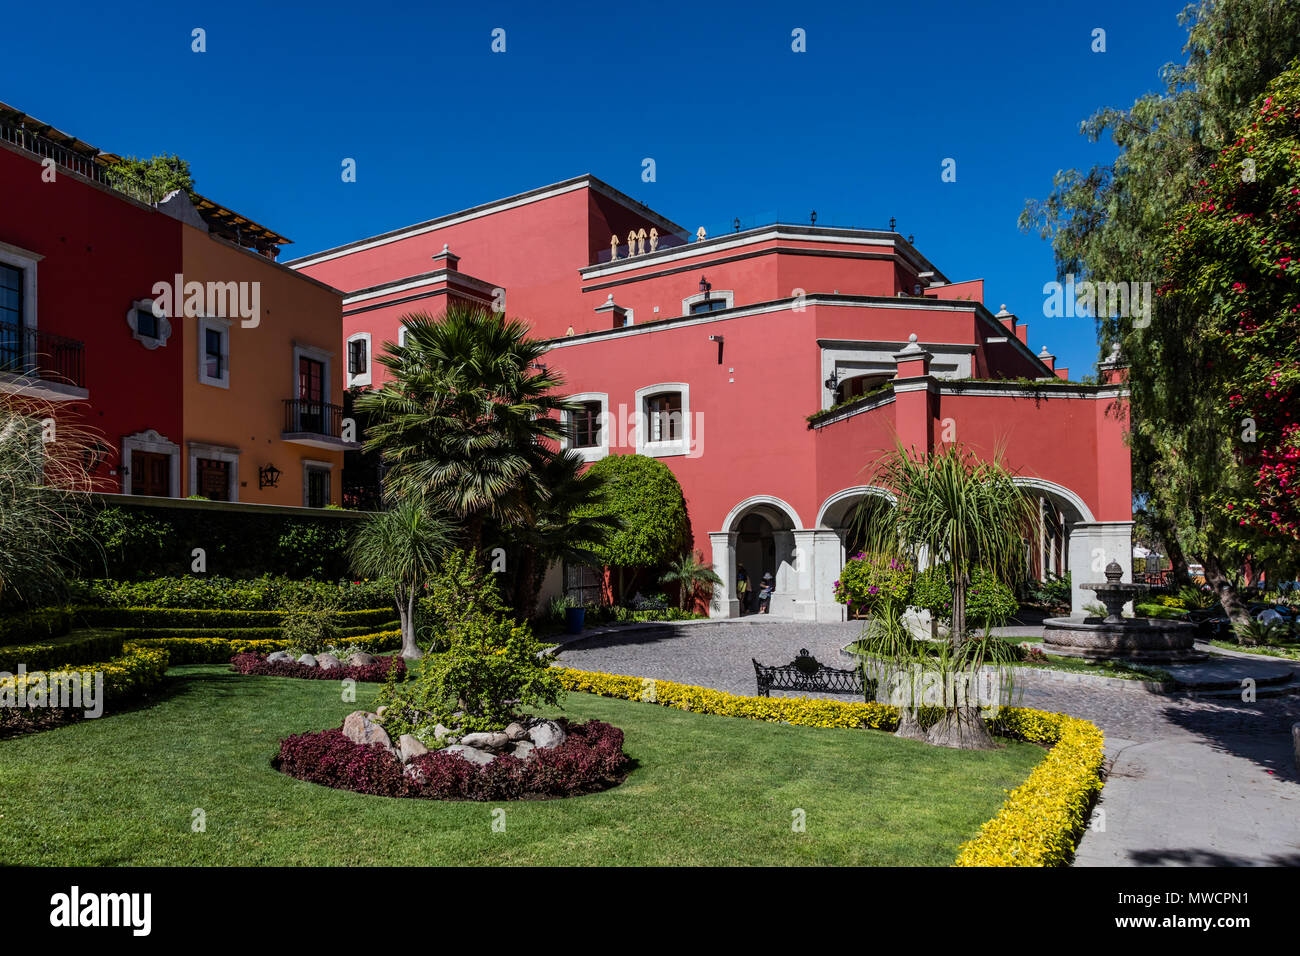 The front entrance to the ROSEWOOD HOTEL - SAN MIGUEL DE ALLENDE, MEXICO Stock Photo